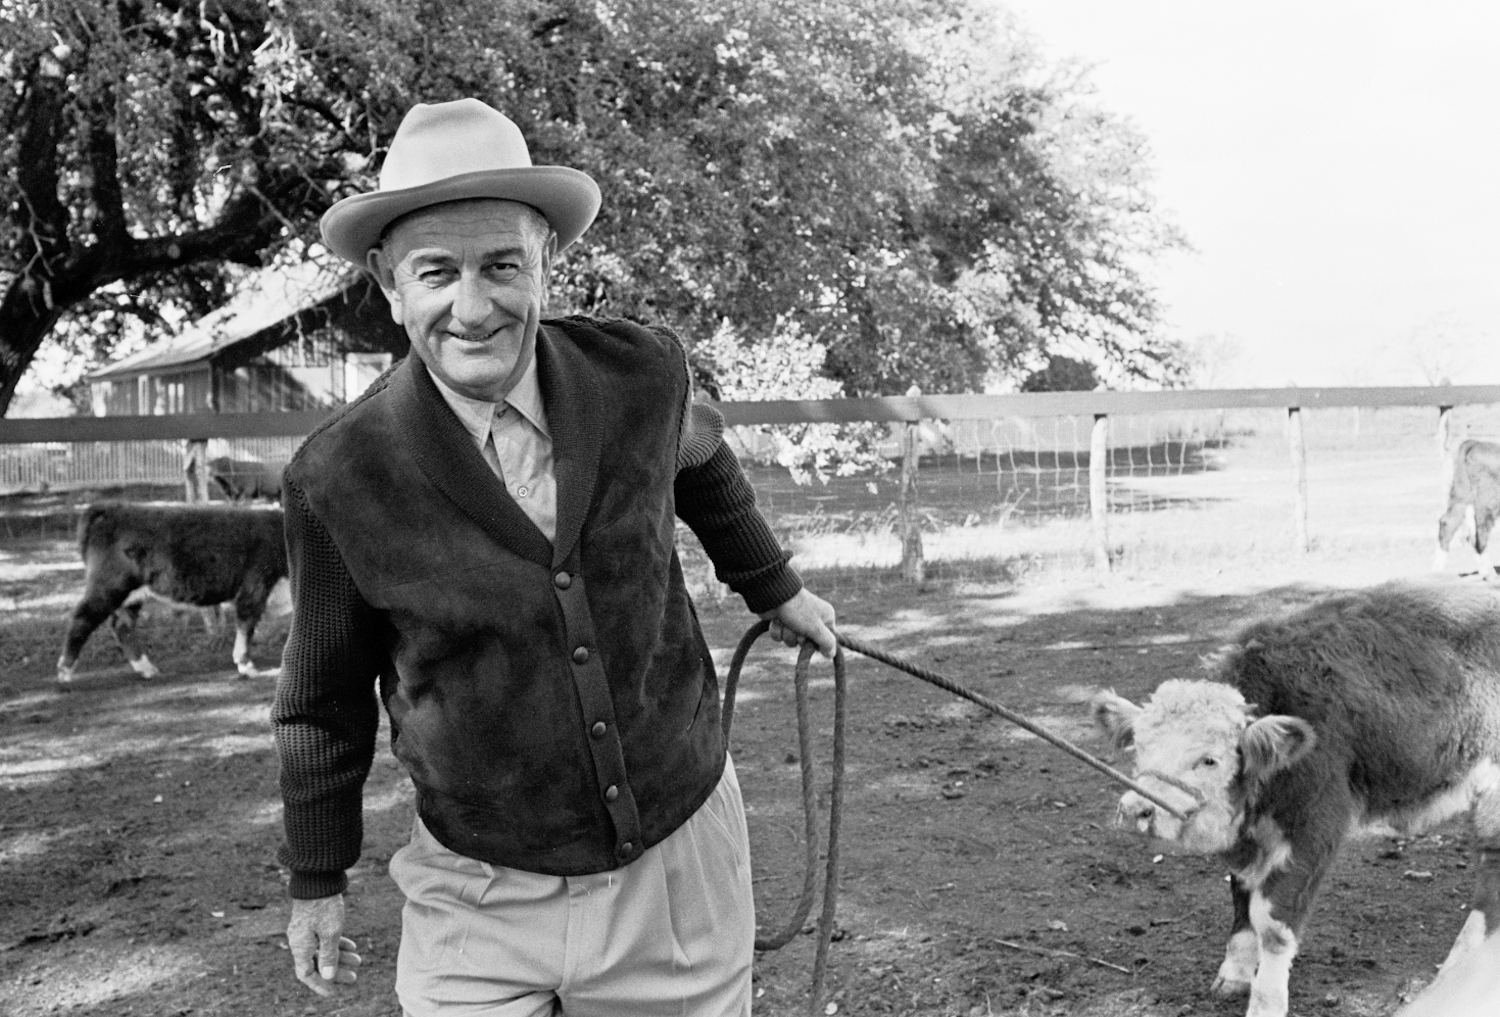 President Lyndon B. Johnson pulls a calf by a rope in a vintage black-and-white photo taken at his ranch.